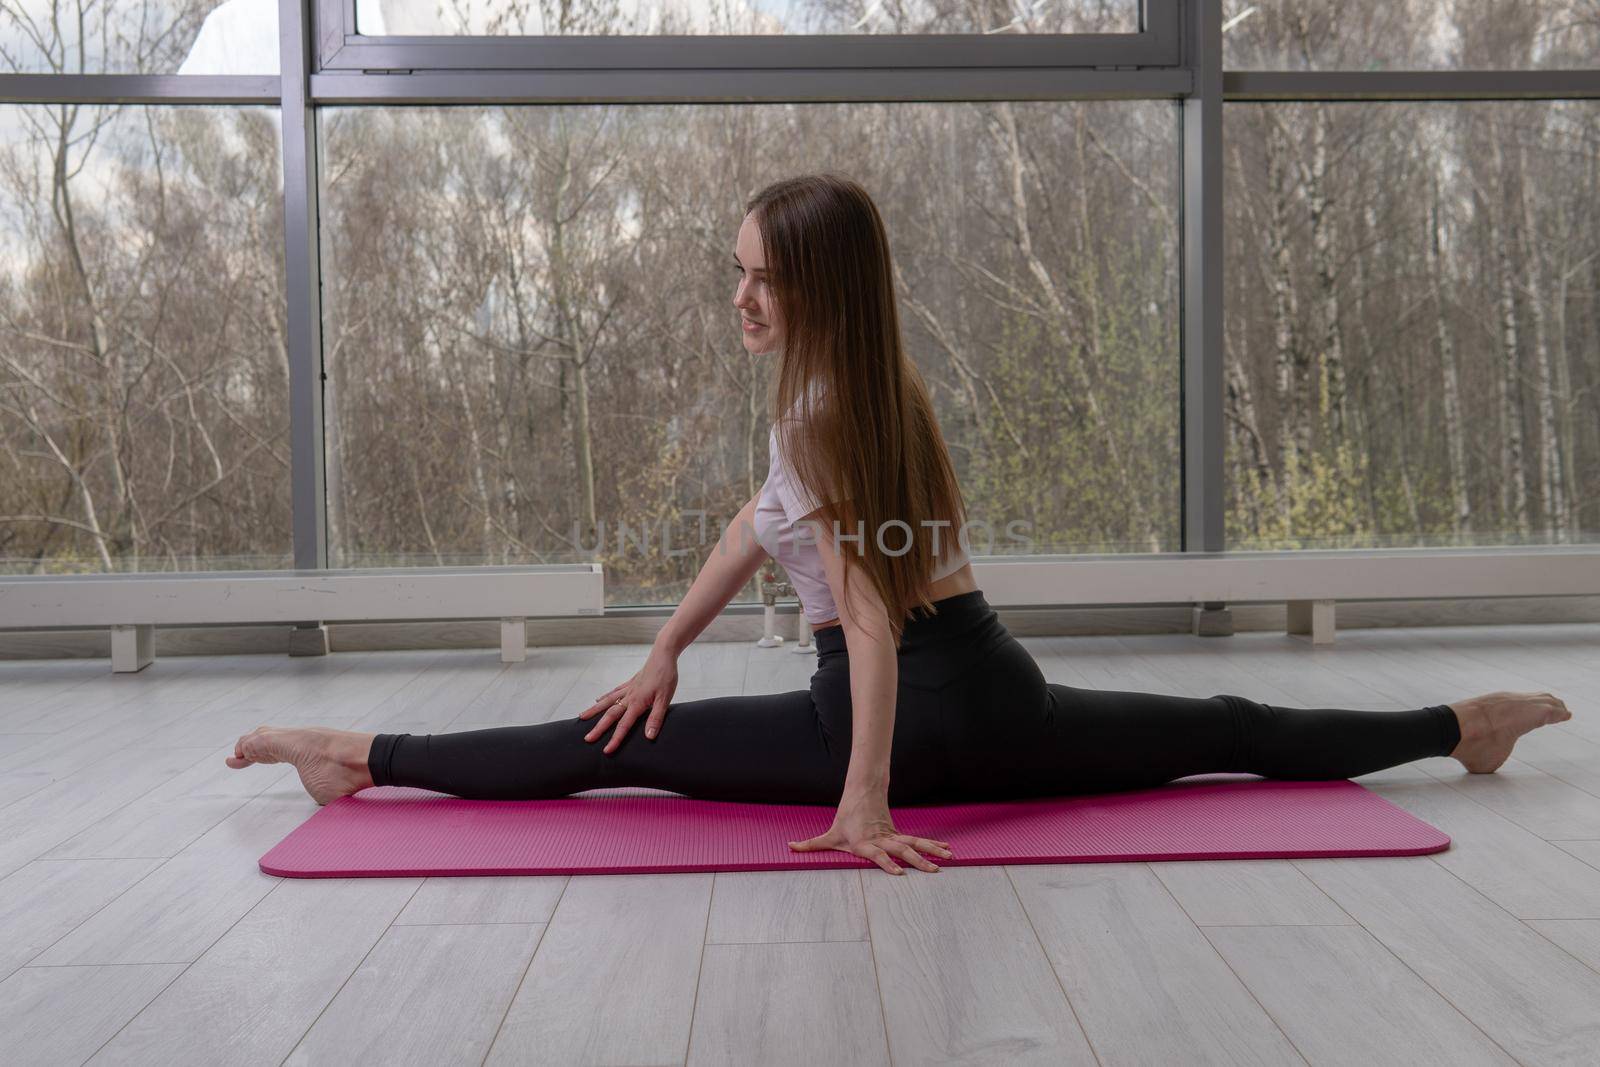 A gymnast sits smiling . Twine fitness the in red mfr strength, from fit cheerful in exercise and healthy person, floor stretch. Gymnastics slim leg, technology practicing pose